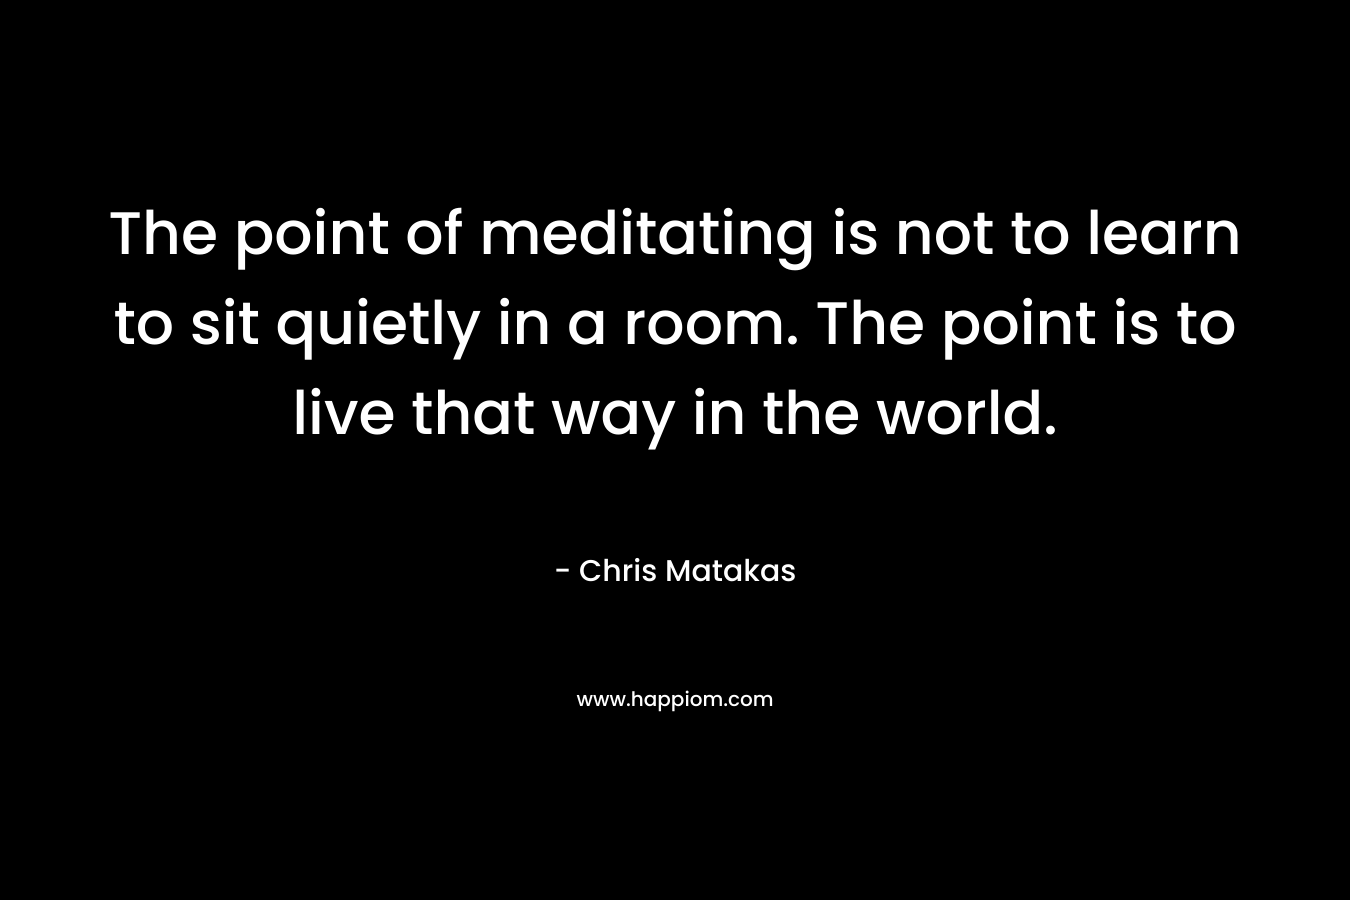 The point of meditating is not to learn to sit quietly in a room. The point is to live that way in the world. – Chris Matakas